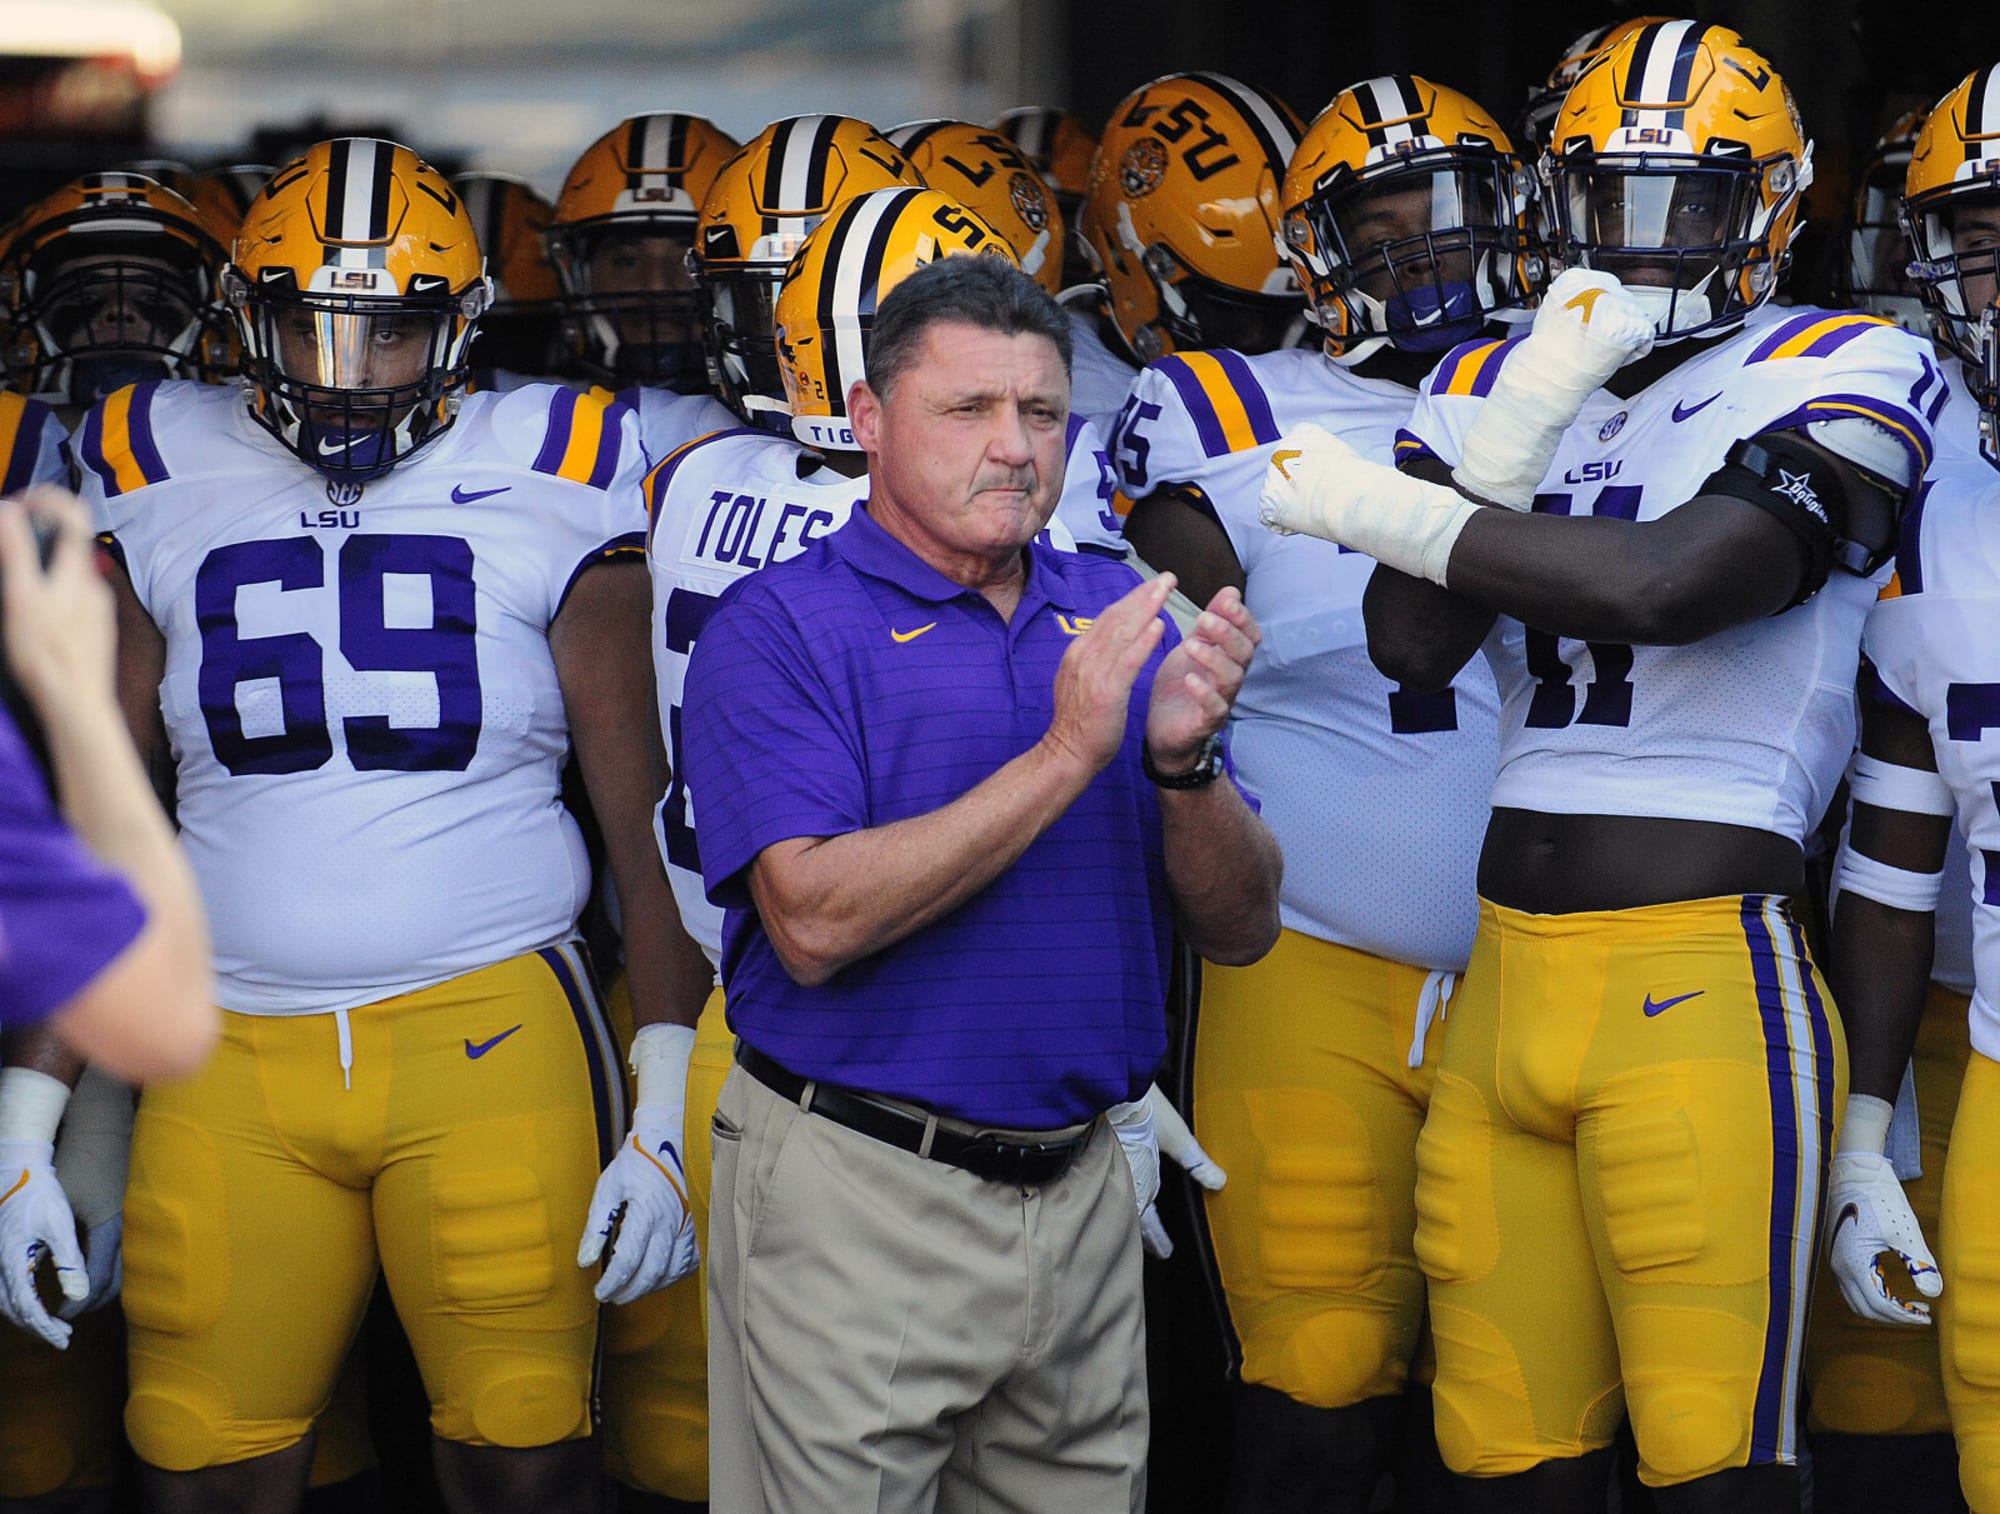 Lsu Football Schedule 2022 23 2022 Lsu Football Schedule: Complete List Of Tigers Games